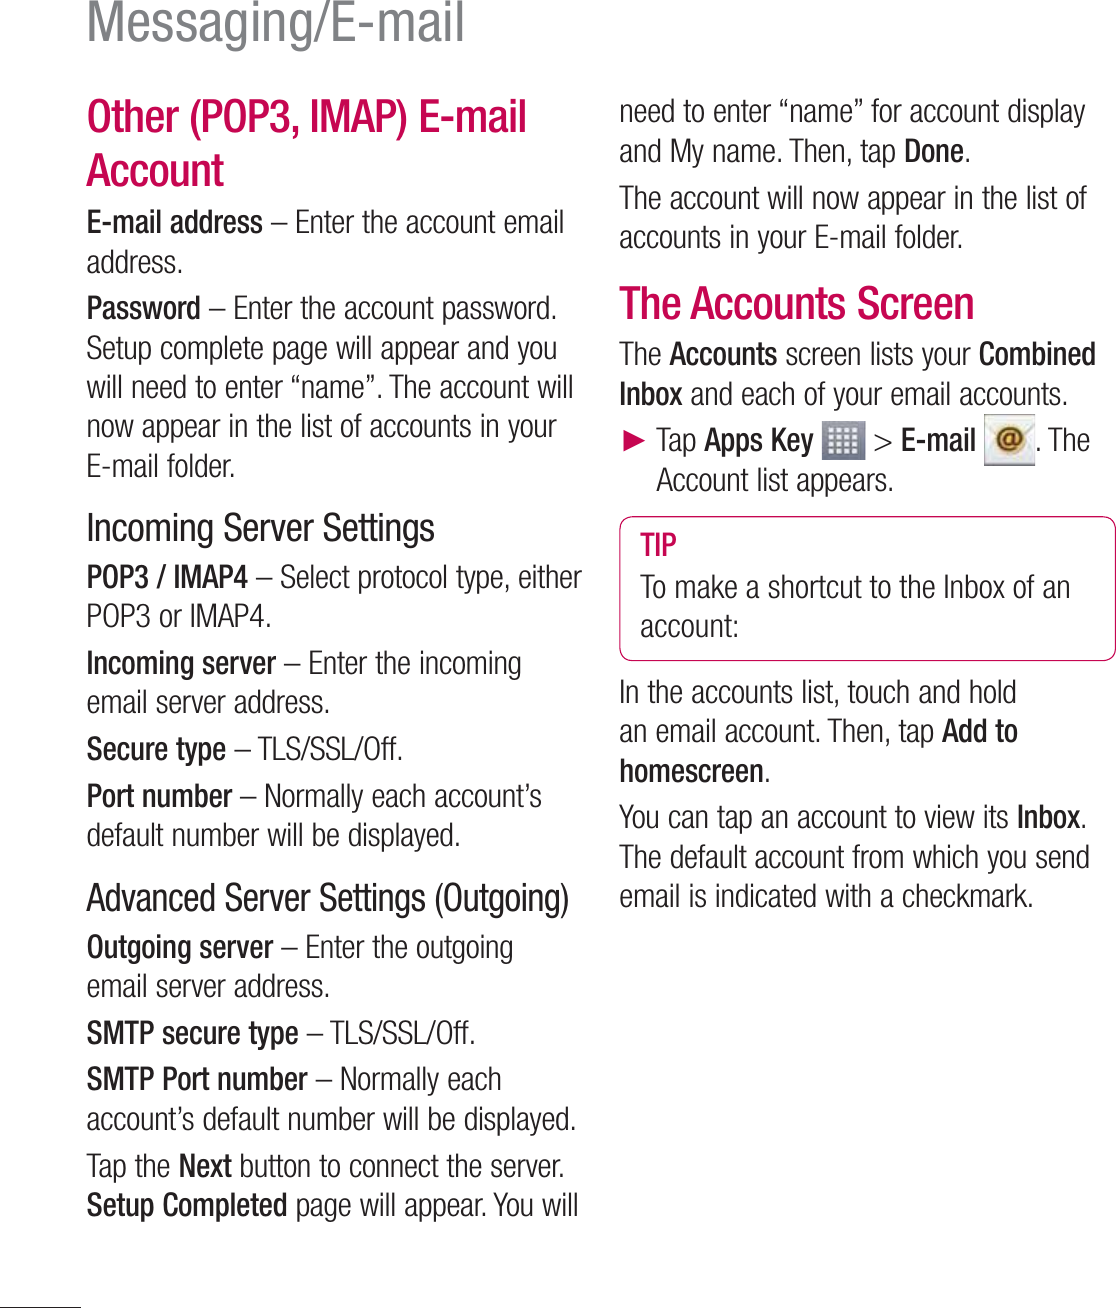 62Messaging/E-mailOther (POP3, IMAP) E-mail Account E-mail address – Enter the account email address.Password – Enter the account password. Setup complete page will appear and you will need to enter “name”. The account will now appear in the list of accounts in your E-mail folder.Incoming Server SettingsPOP3 / IMAP4 – Select protocol type, either POP3 or IMAP4.Incoming server – Enter the incoming email server address.Secure type – TLS/SSL/Off.Port number – Normally each account’s default number will be displayed.Advanced Server Settings (Outgoing)Outgoing server – Enter the outgoing email server address.SMTP secure type – TLS/SSL/Off.SMTP Port number – Normally each account’s default number will be displayed.Tap the Next button to connect the server. Setup Completed page will appear. You will need to enter “name” for account display and My name. Then, tap Done. The account will now appear in the list of accounts in your E-mail folder.The Accounts ScreenThe Accounts screen lists your Combined Inbox and each of your email accounts.Ź  Tap Apps Key  &gt; E-mail . The Account list appears.TIPTo make a shortcut to the Inbox of an account:In the accounts list, touch and hold an email account. Then, tap Add to homescreen.You can tap an account to view its Inbox. The default account from which you send email is indicated with a checkmark.